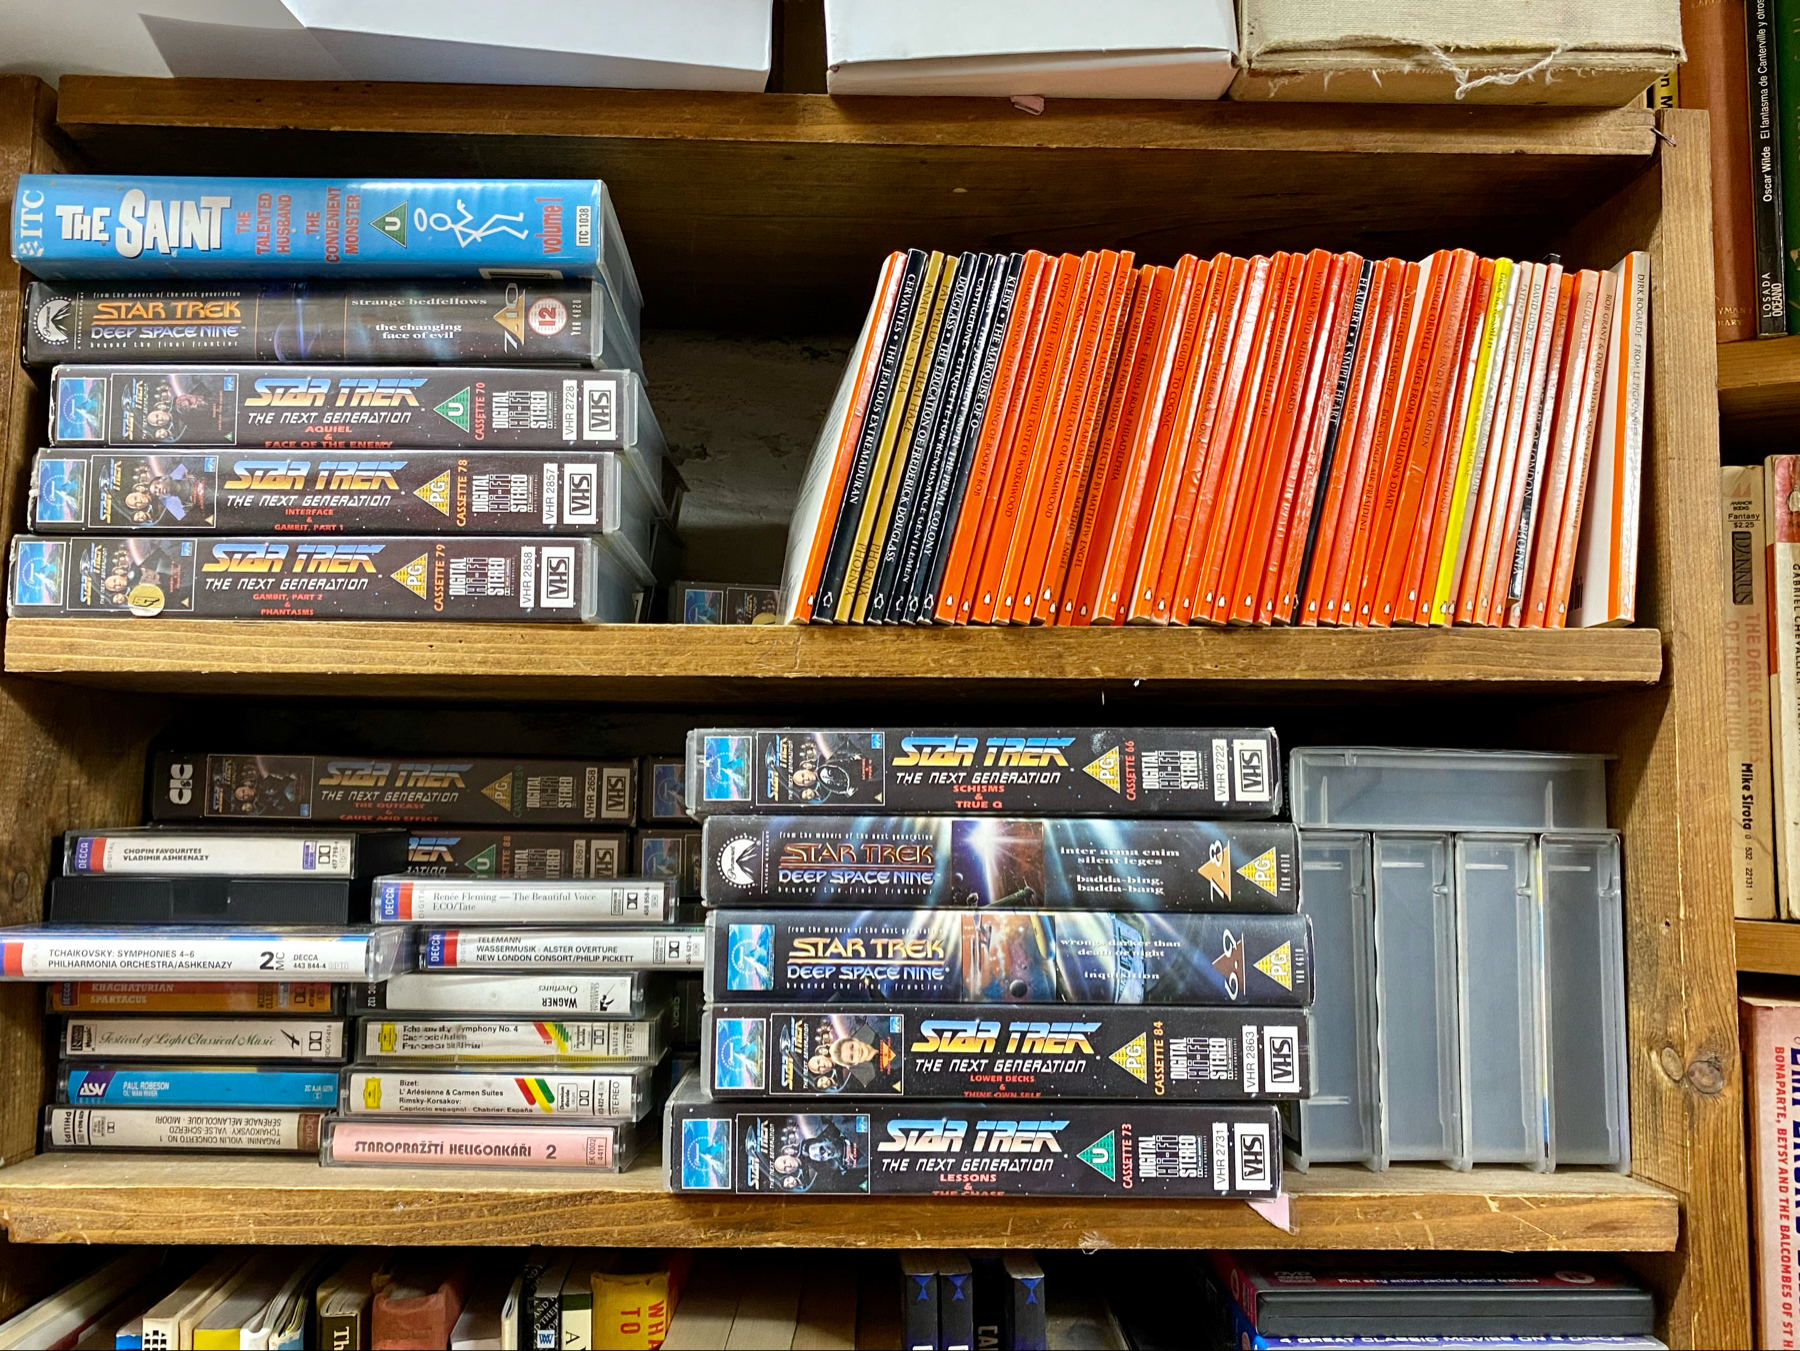 A wooden bookshelf filled with various VHS tapes, mostly from the Star Trek series, and a row of orange-spined books. The top shelf includes a box set for The Saint TV series.